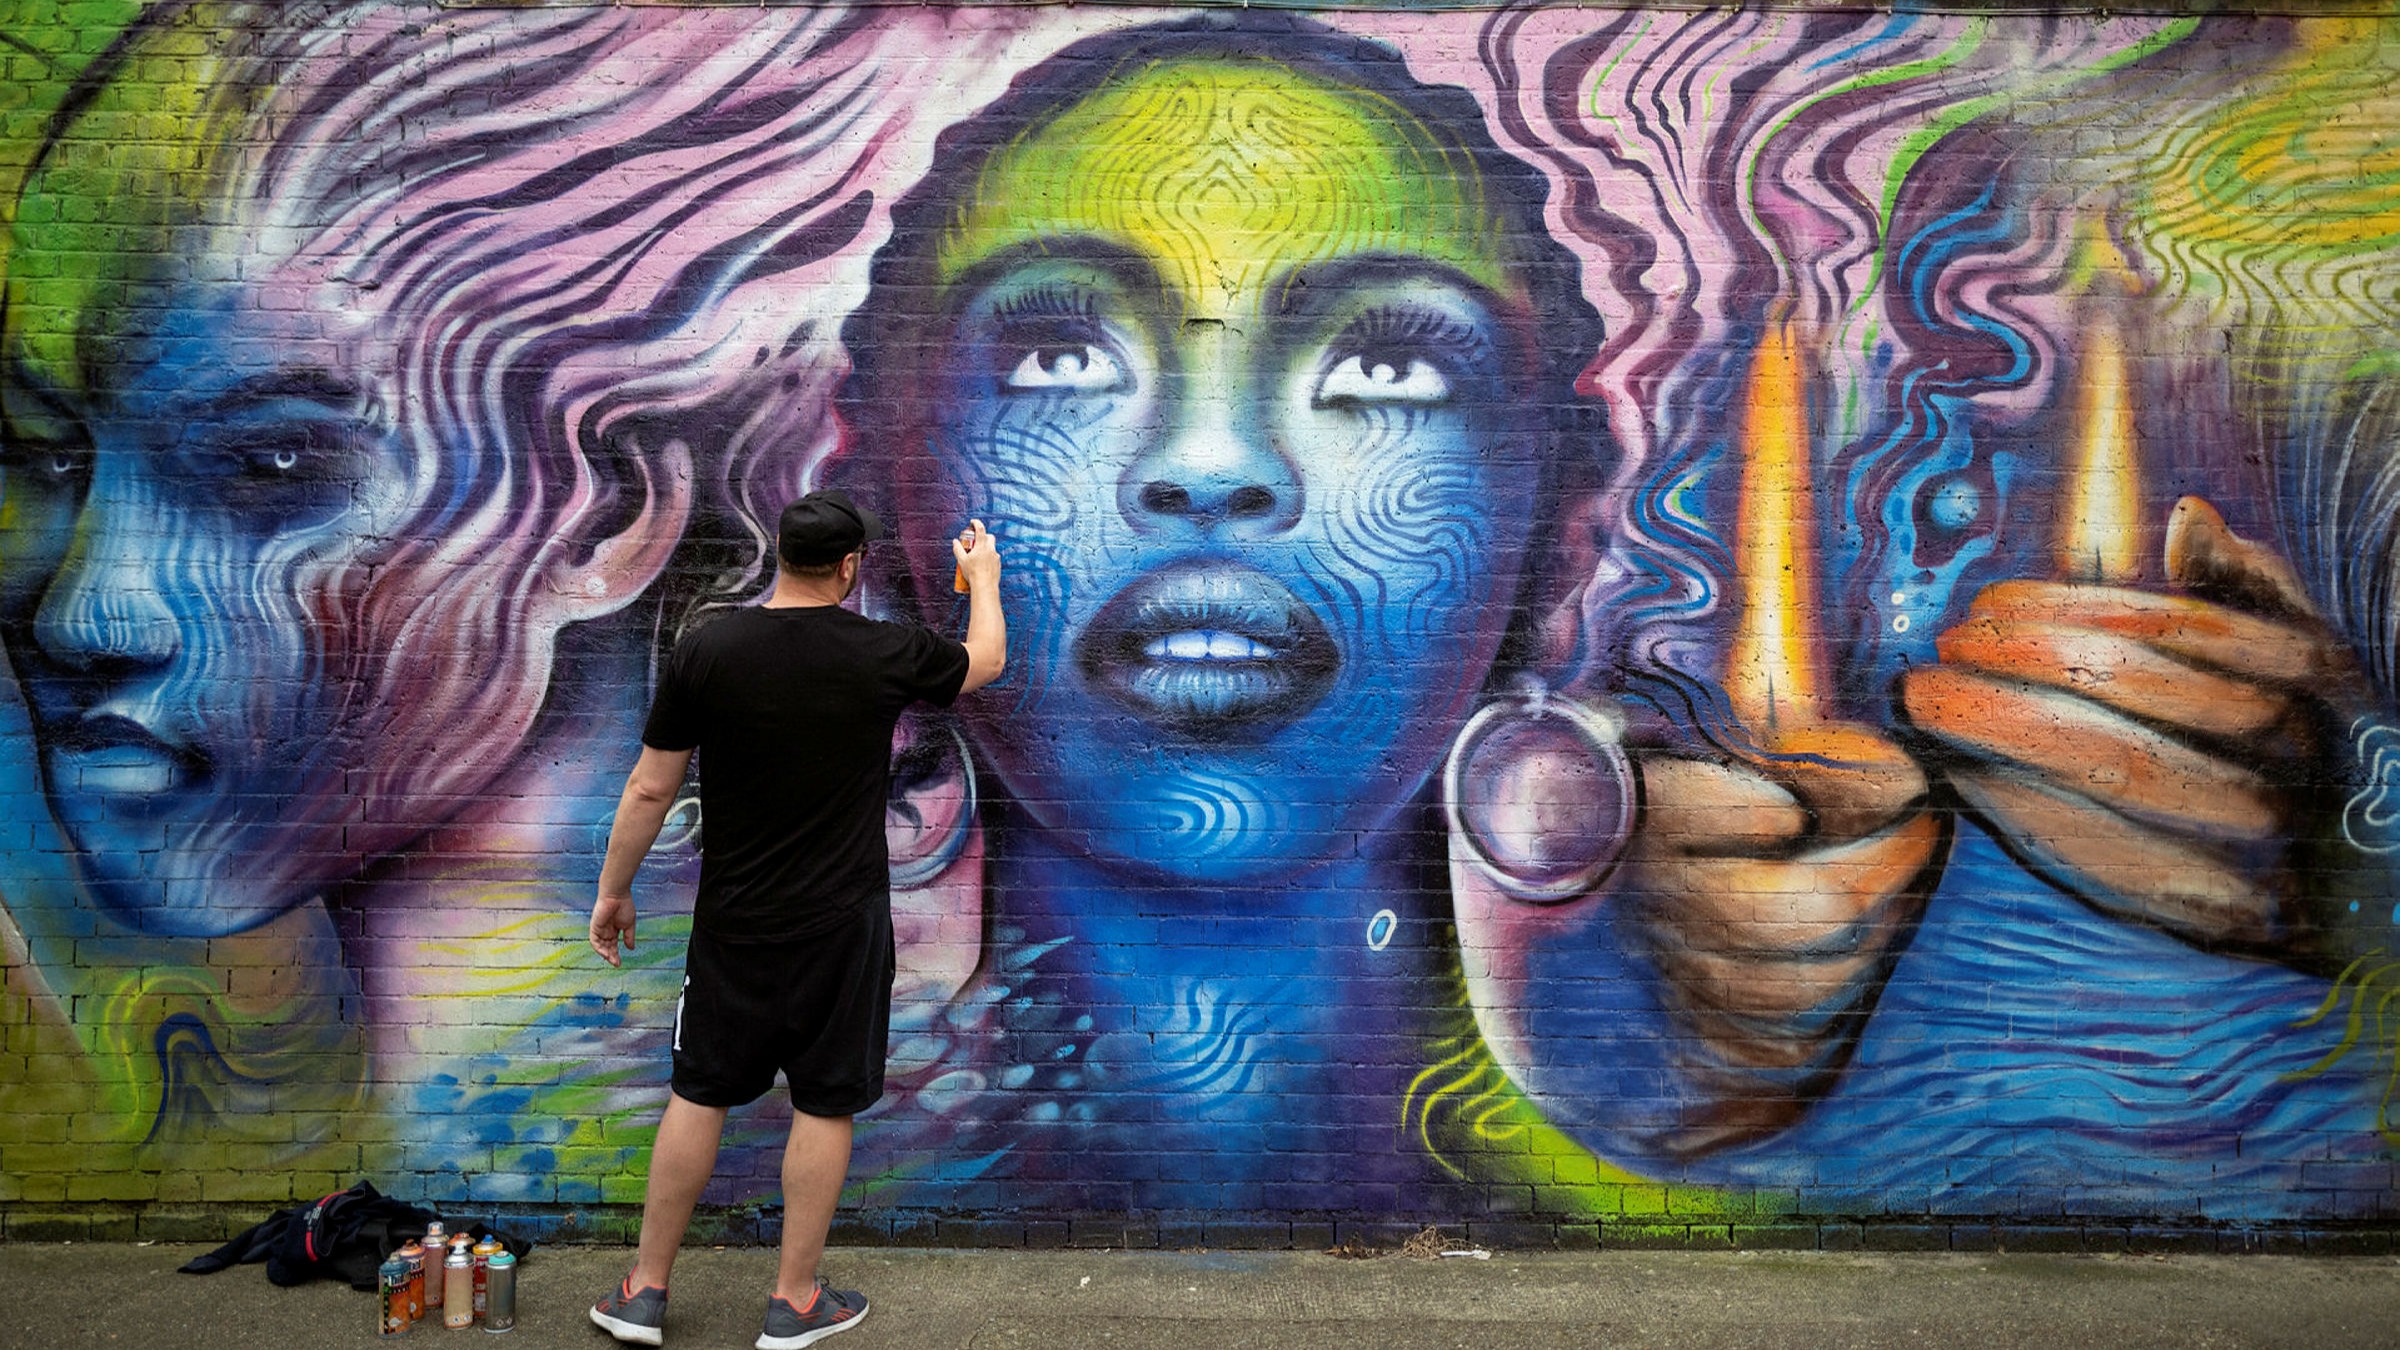 How To Make A Career In Street Art Financial Times